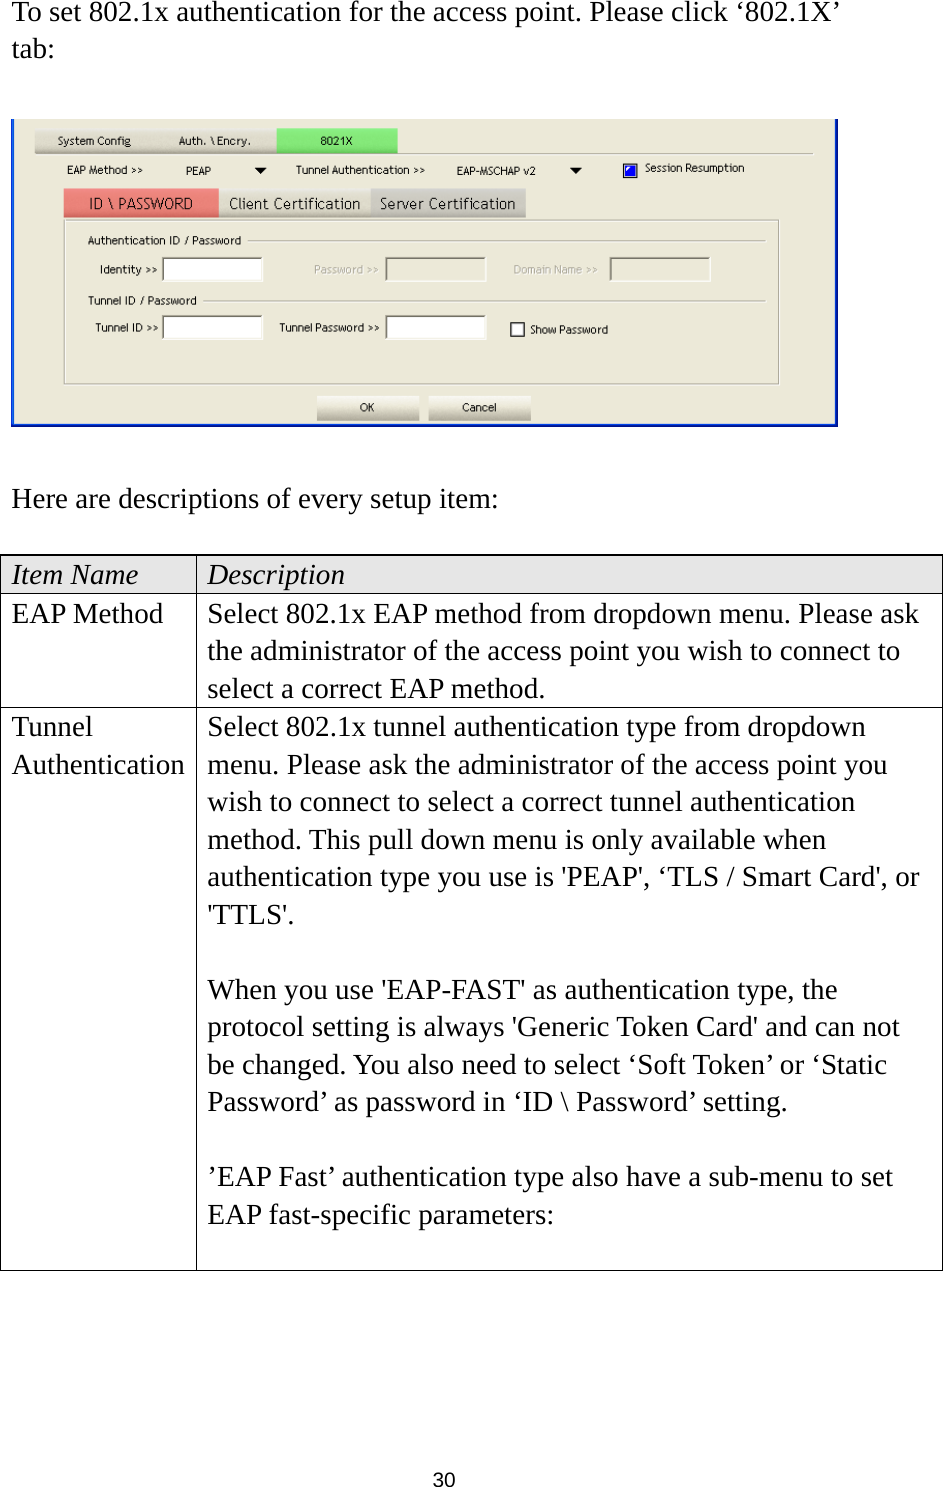  30 To set 802.1x authentication for the access point. Please click ‘802.1X’ tab:    Here are descriptions of every setup item:  Item Name  Description EAP Method  Select 802.1x EAP method from dropdown menu. Please ask the administrator of the access point you wish to connect to select a correct EAP method. Tunnel Authentication Select 802.1x tunnel authentication type from dropdown menu. Please ask the administrator of the access point you wish to connect to select a correct tunnel authentication method. This pull down menu is only available when authentication type you use is &apos;PEAP&apos;, ‘TLS / Smart Card&apos;, or &apos;TTLS&apos;.   When you use &apos;EAP-FAST&apos; as authentication type, the protocol setting is always &apos;Generic Token Card&apos; and can not be changed. You also need to select ‘Soft Token’ or ‘Static Password’ as password in ‘ID \ Password’ setting.  ’EAP Fast’ authentication type also have a sub-menu to set EAP fast-specific parameters:  